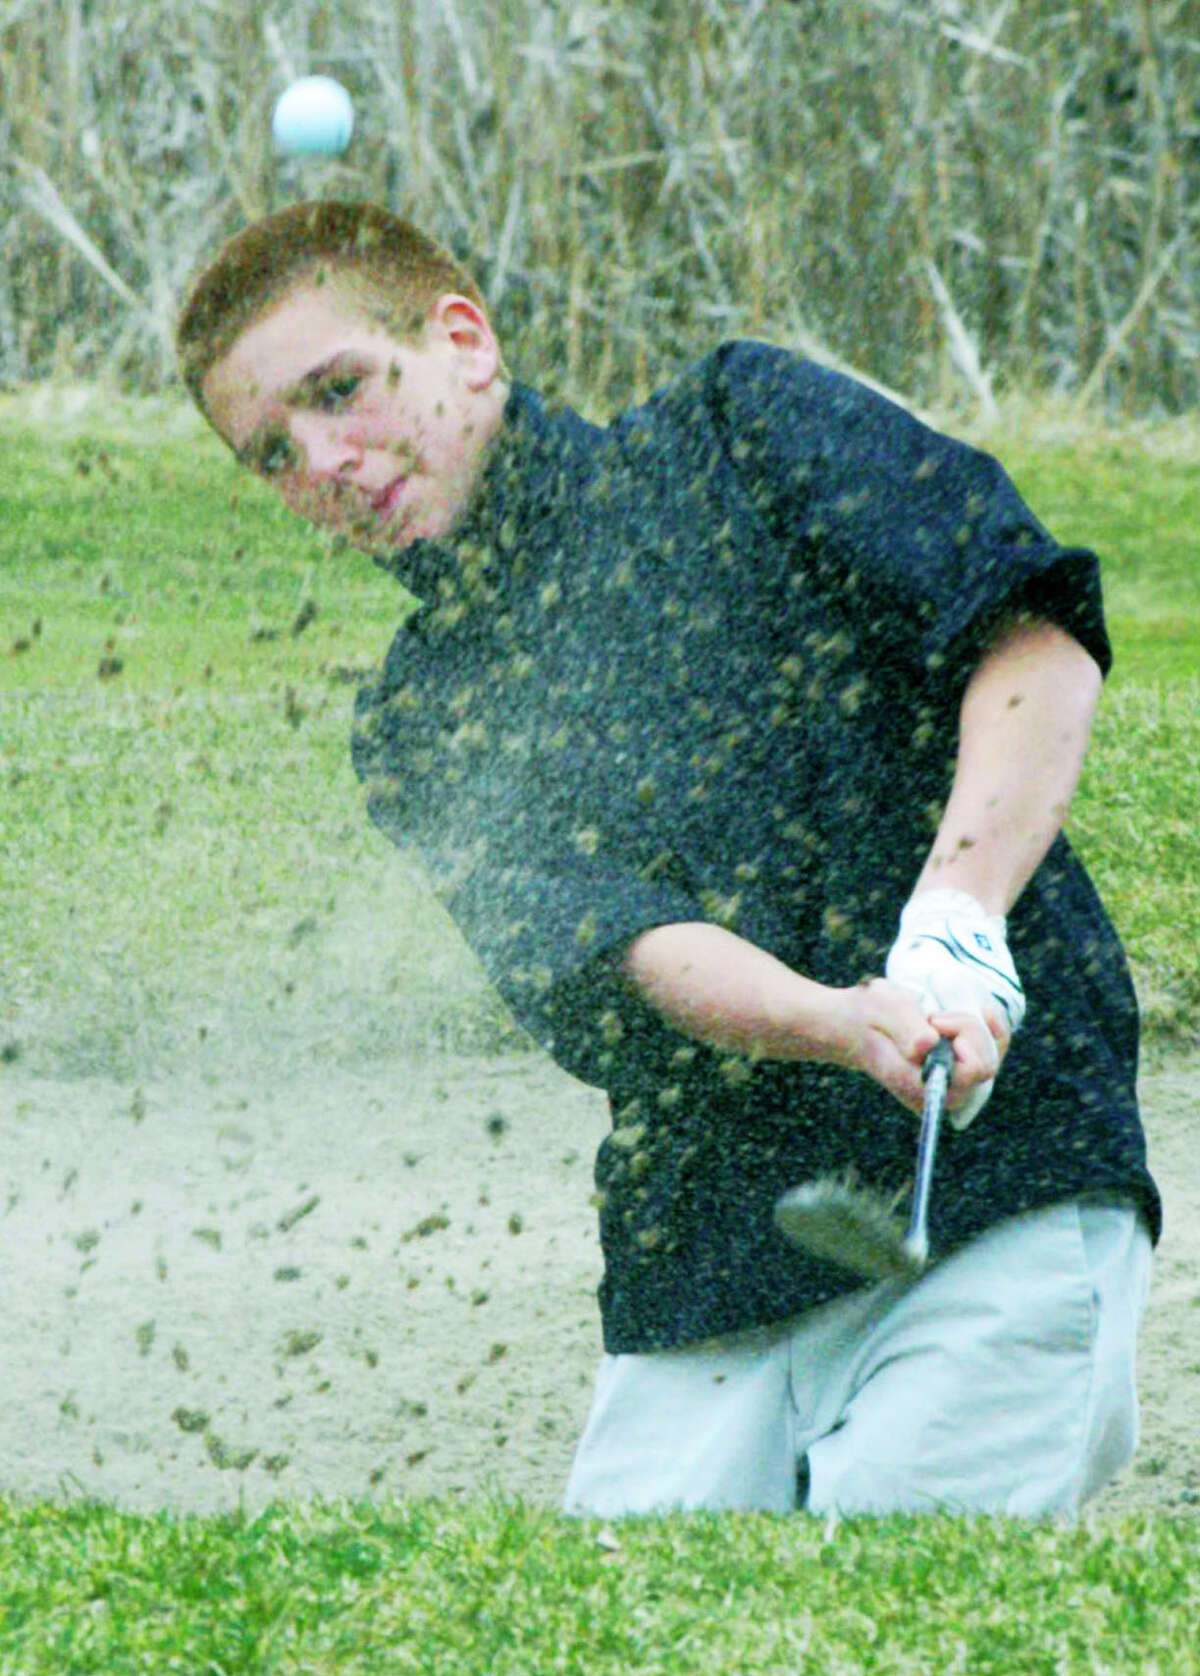 The Green Wave's John Pace blasts his way out of a sand trap during practice at Candlewood Valley Country Club for the New Milford High School golf season. April 2014